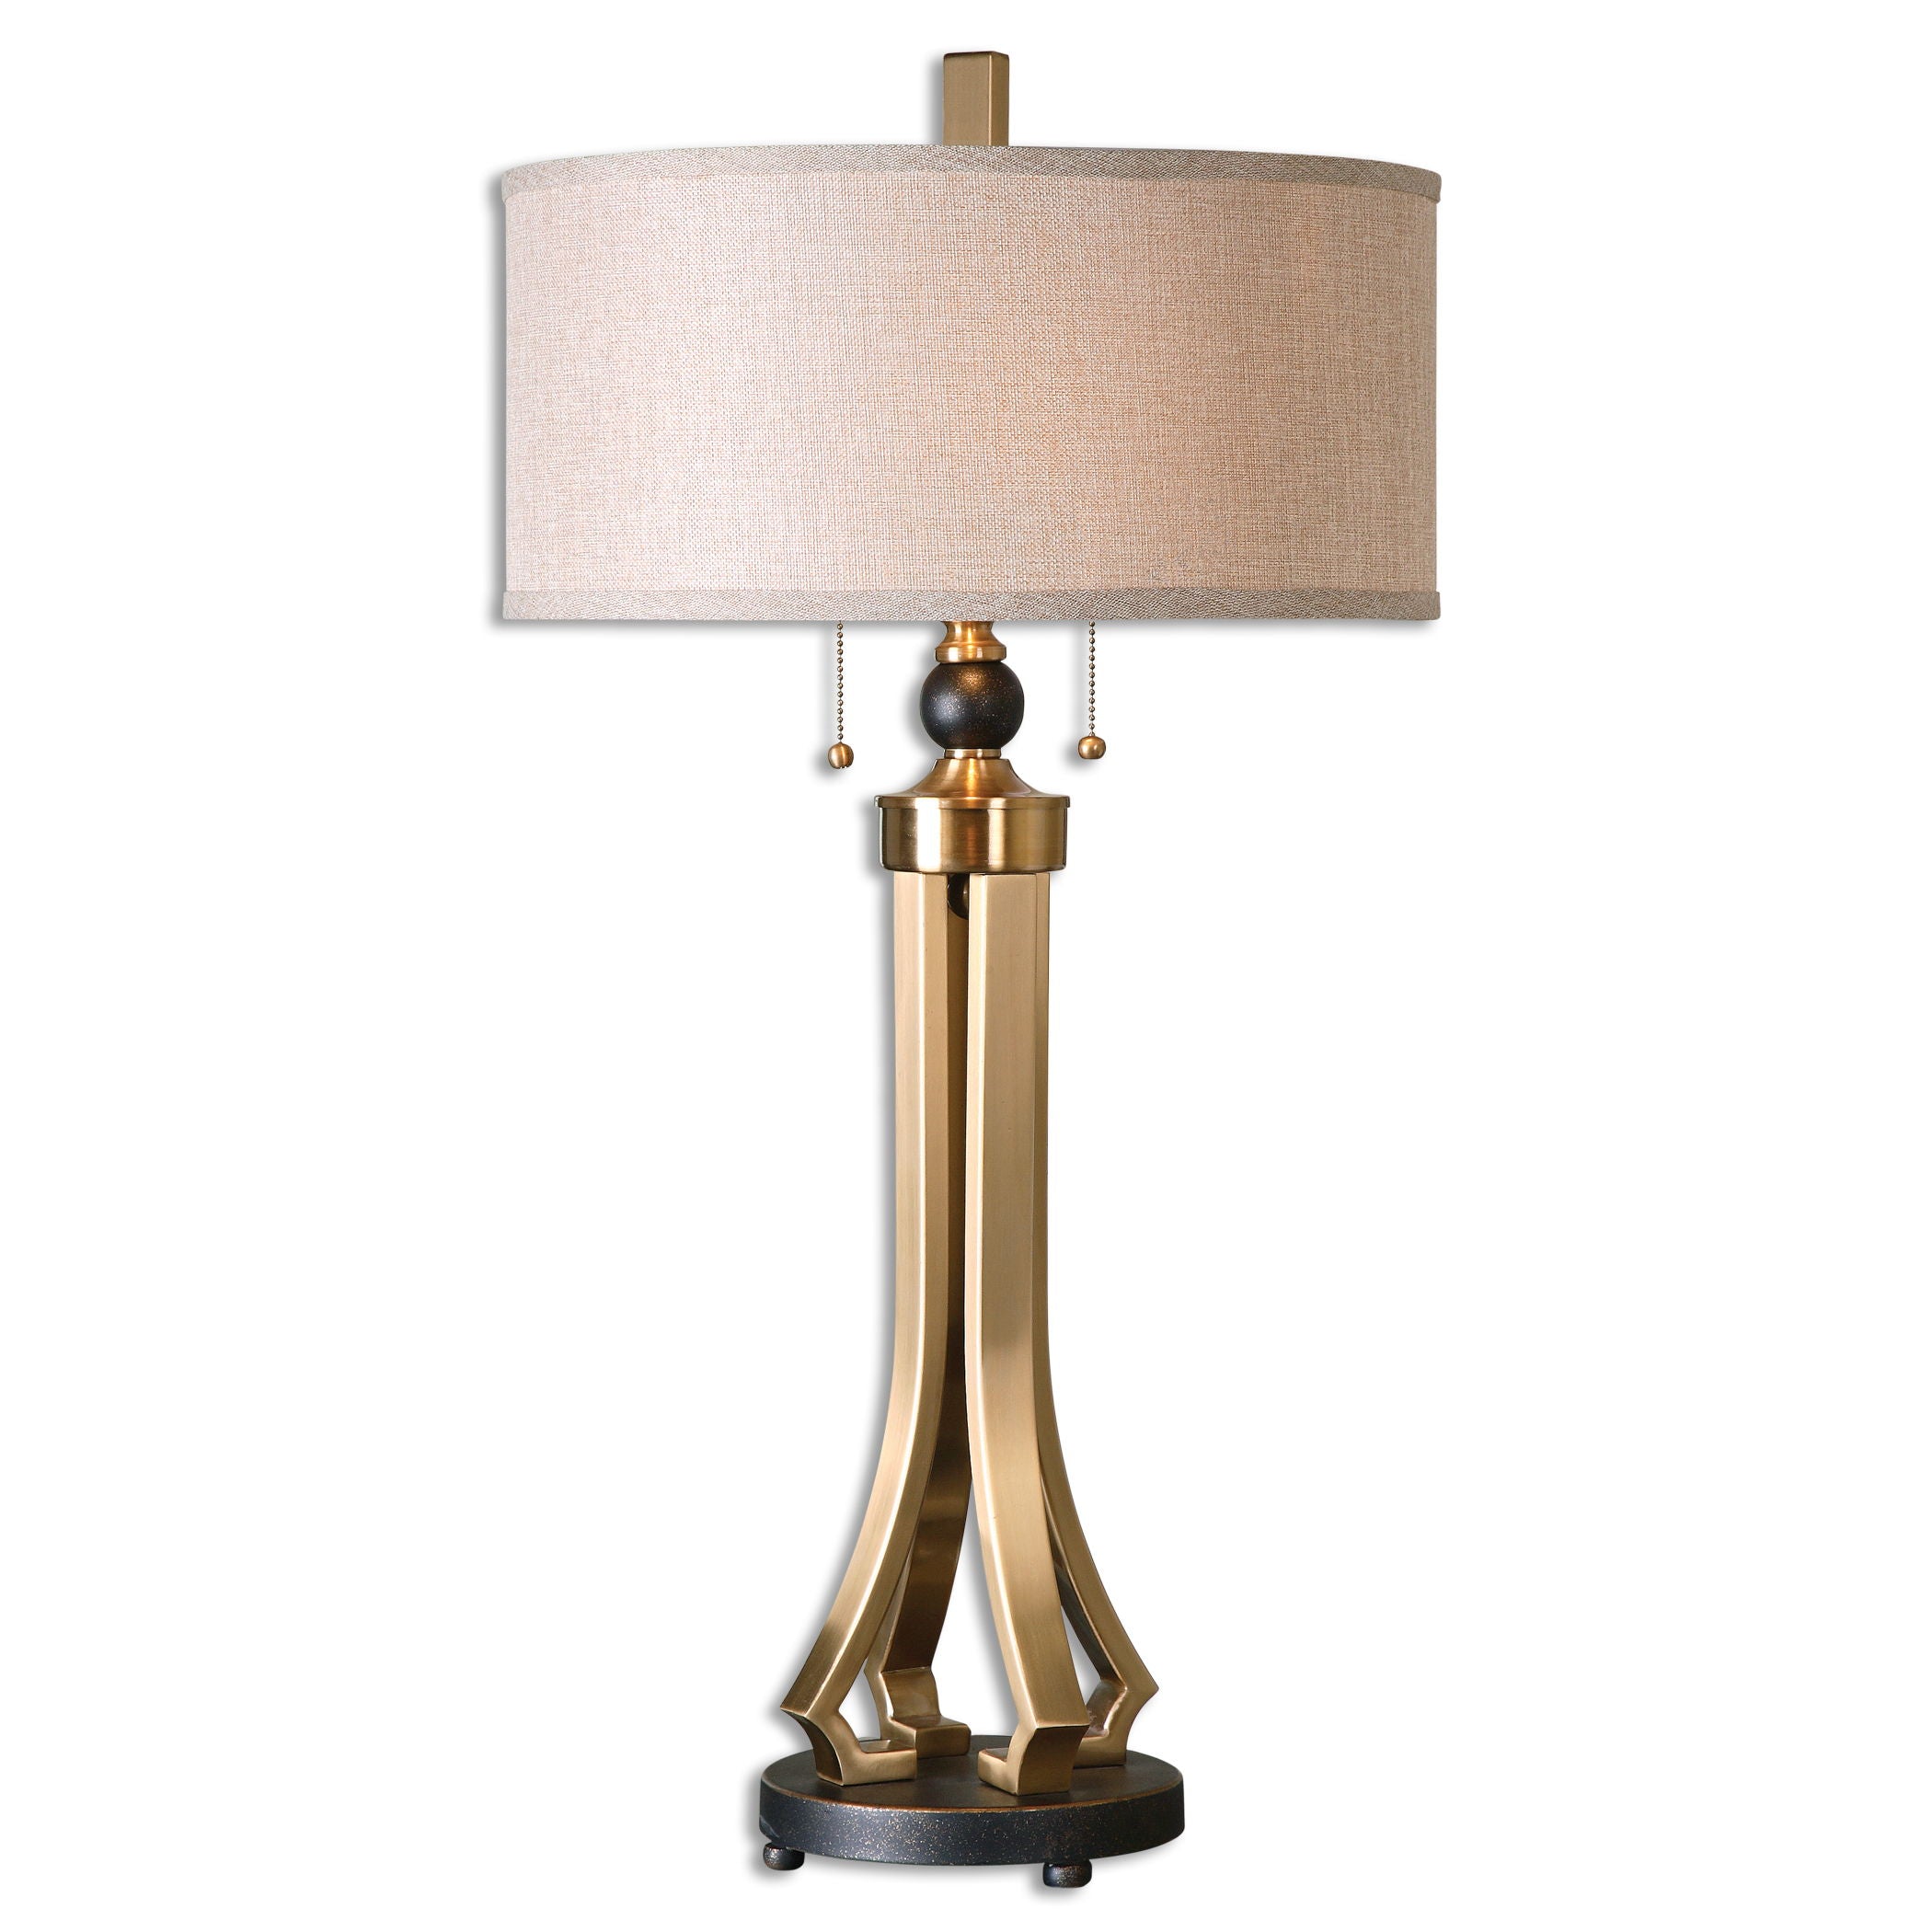 Selvino - Table Lamp - Brushed Brass